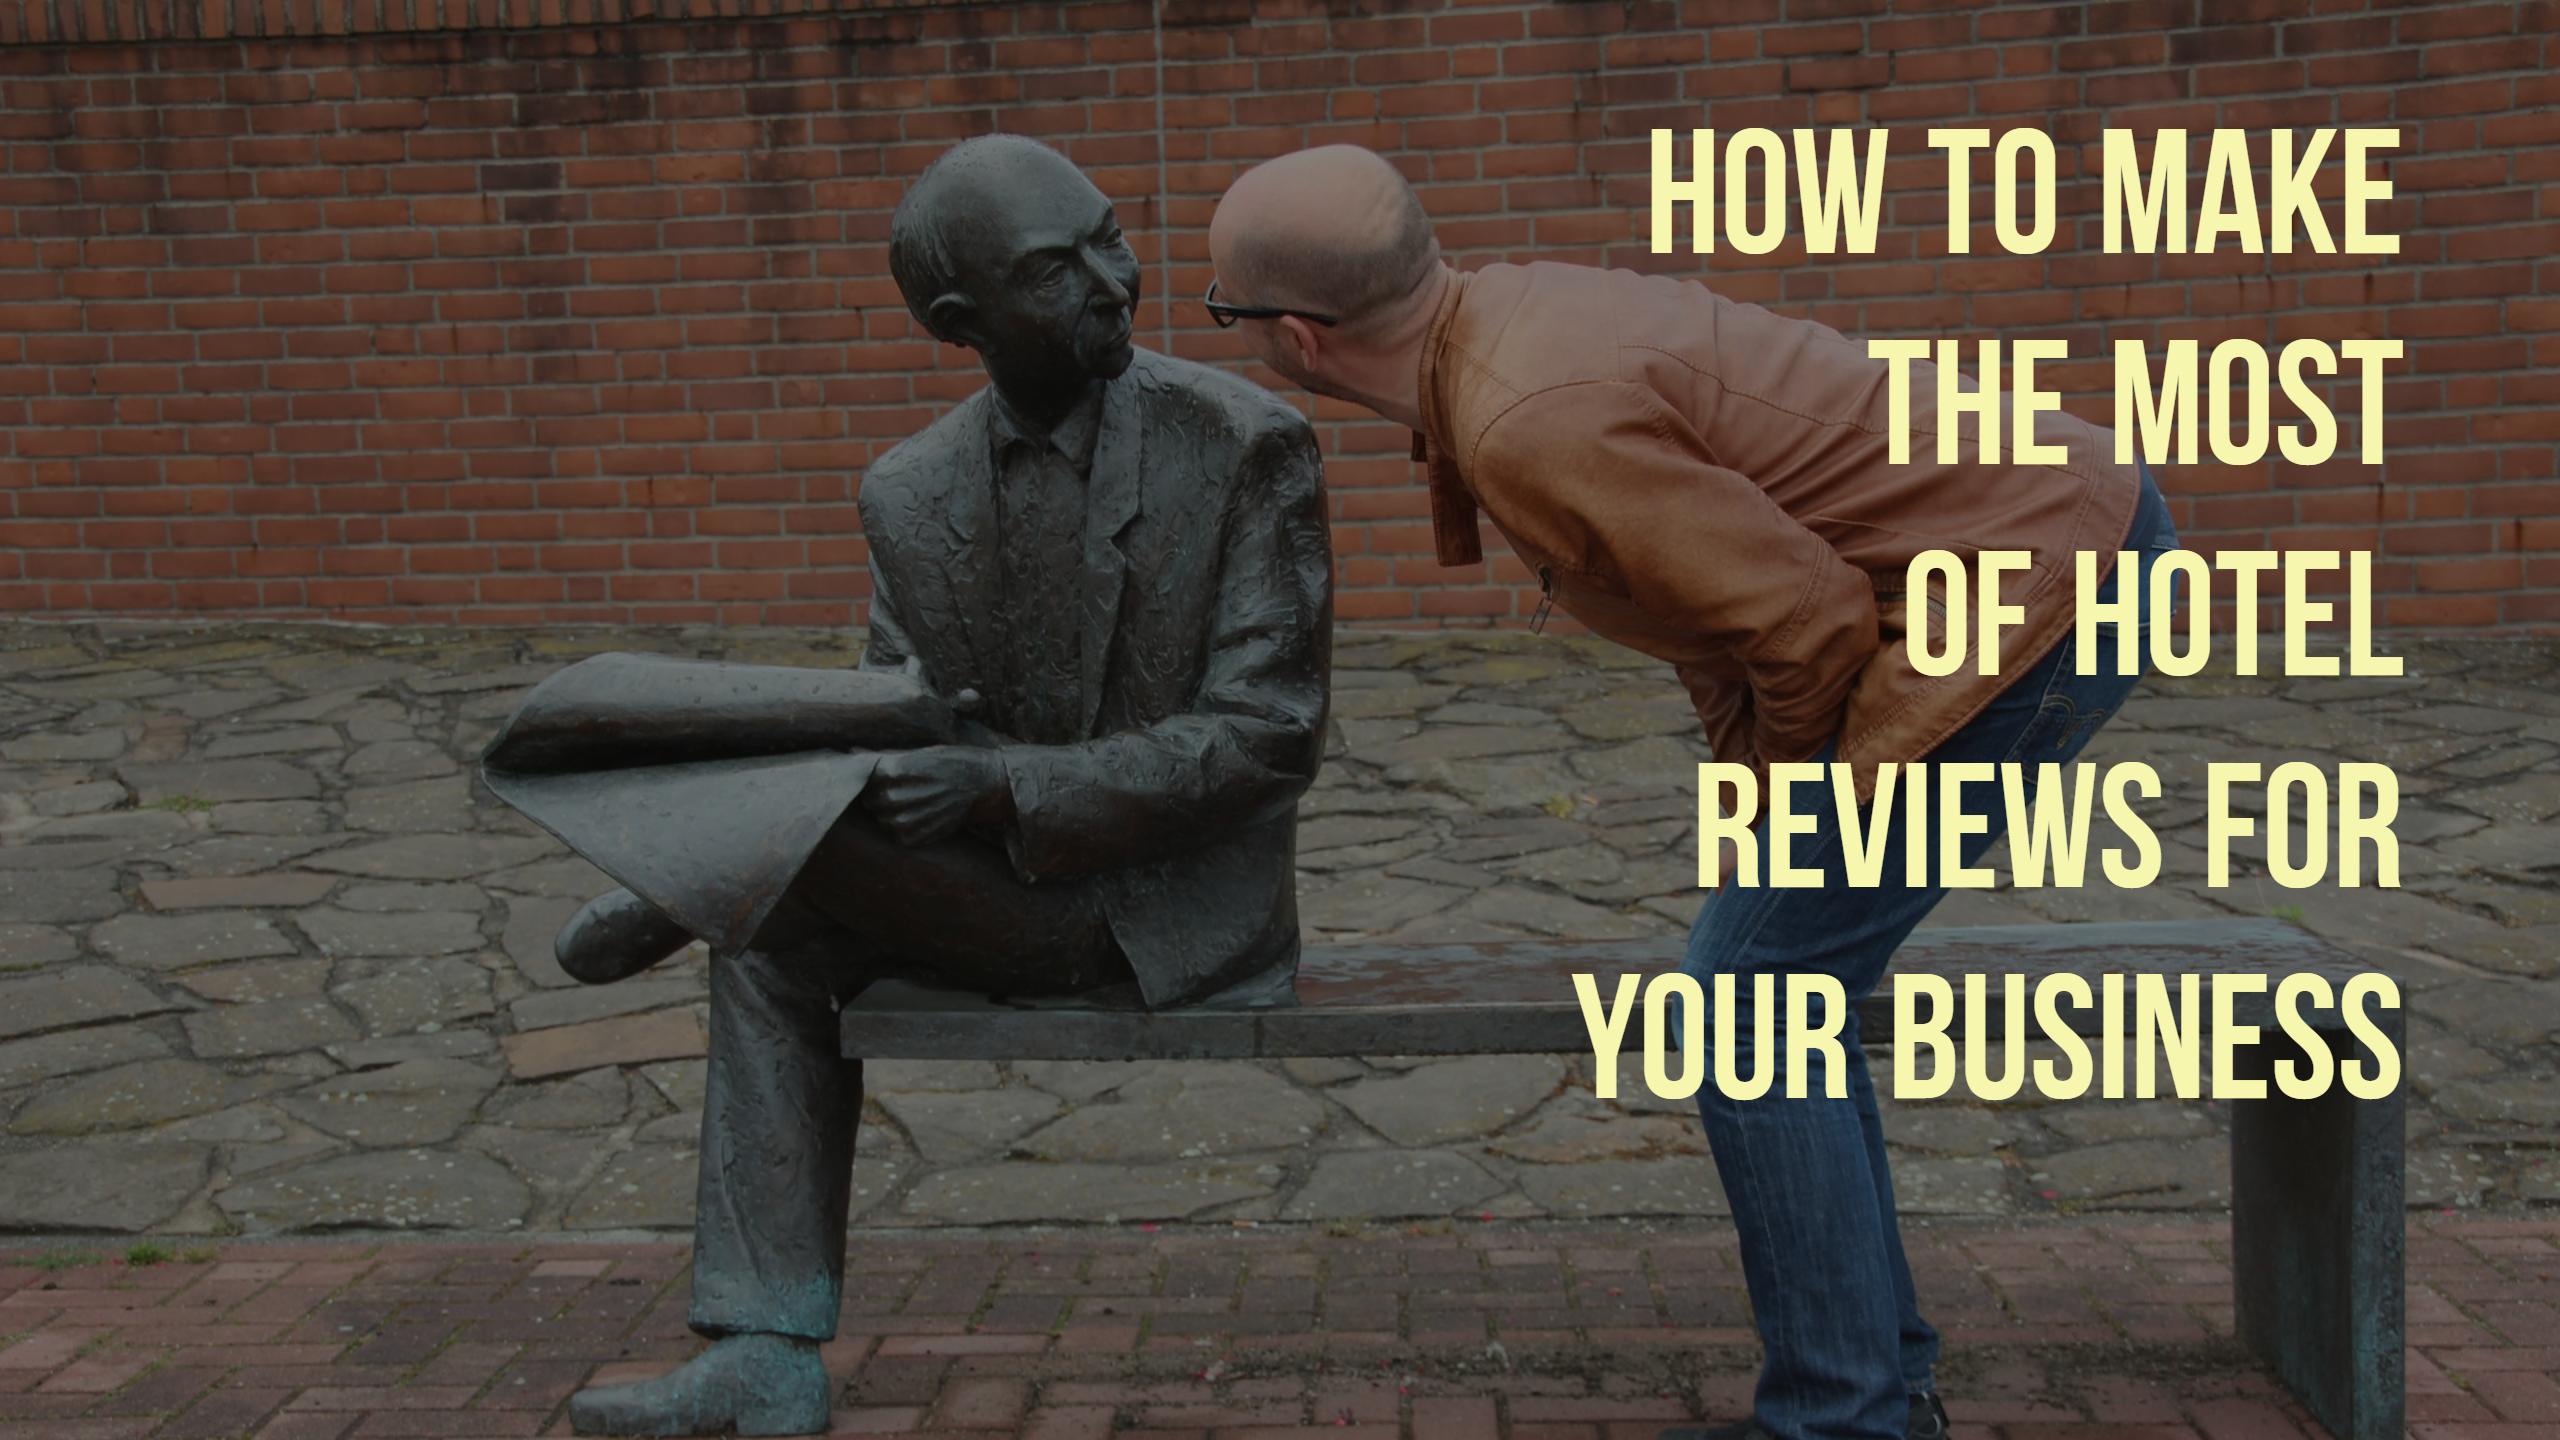 How to Make the Most of Hotel Reviews for Your Business